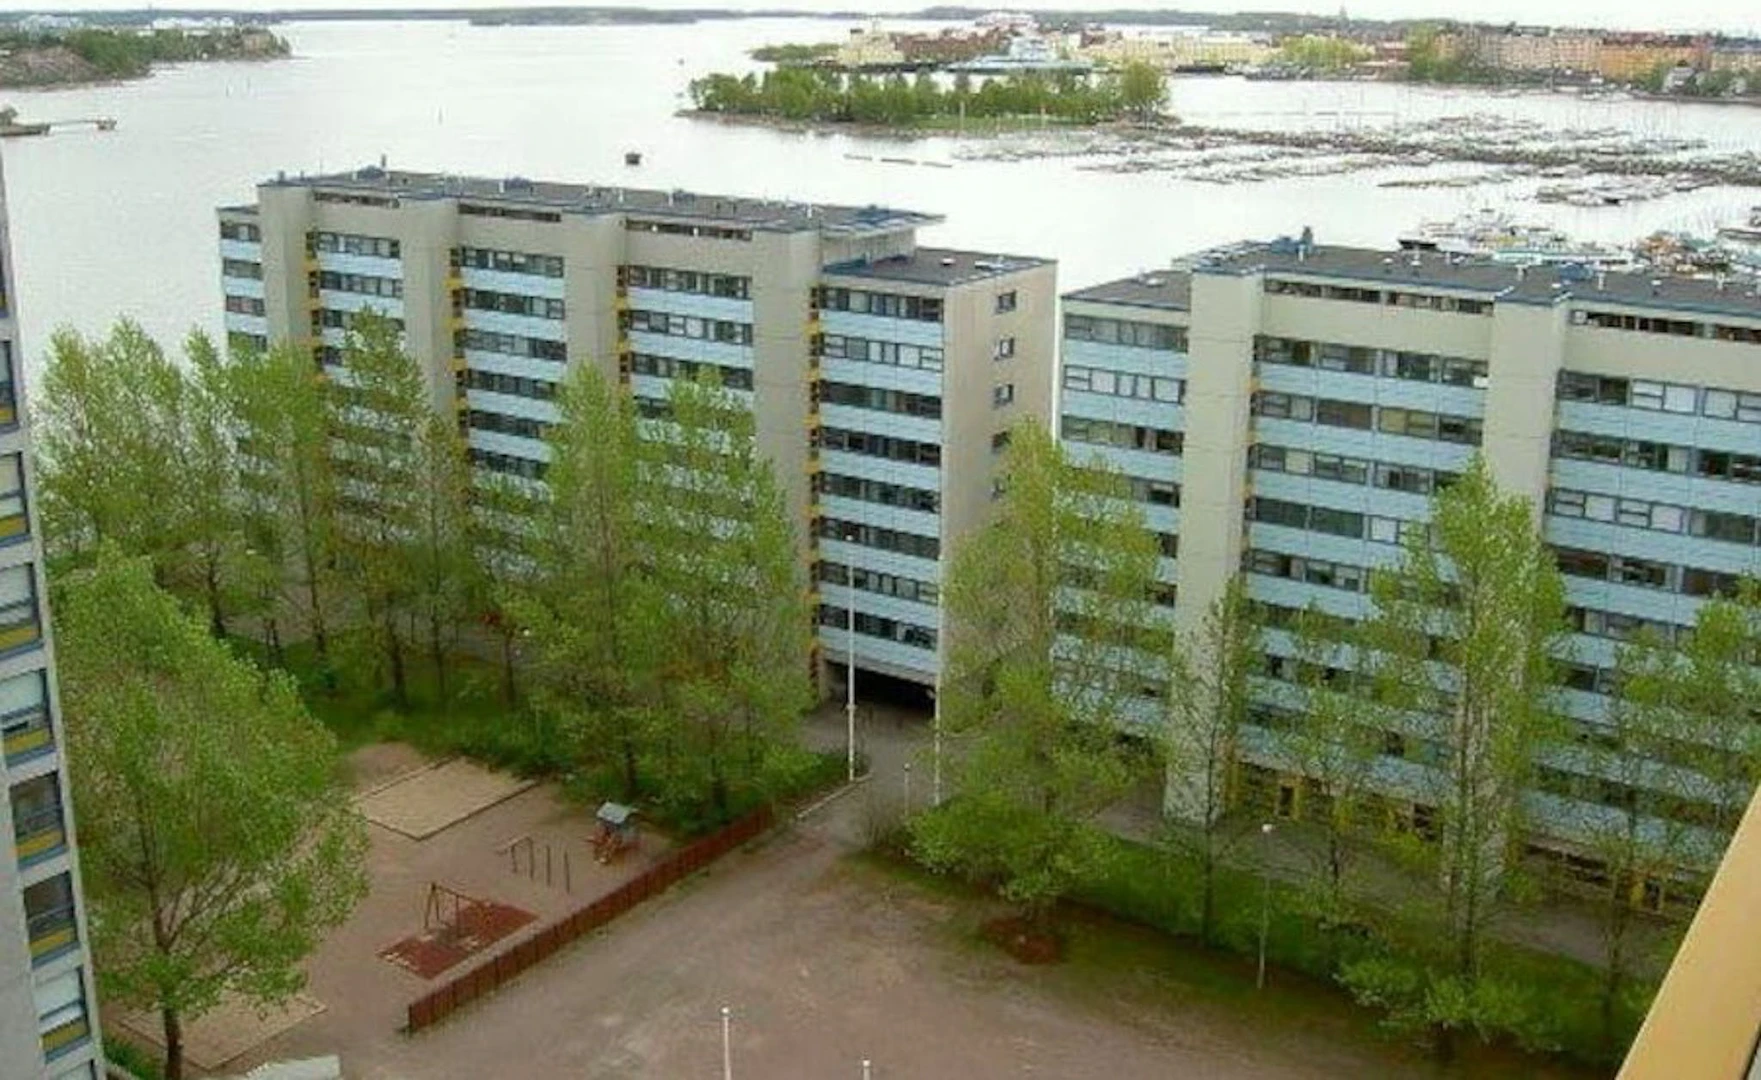 Renting rooms by the month in Helsinki